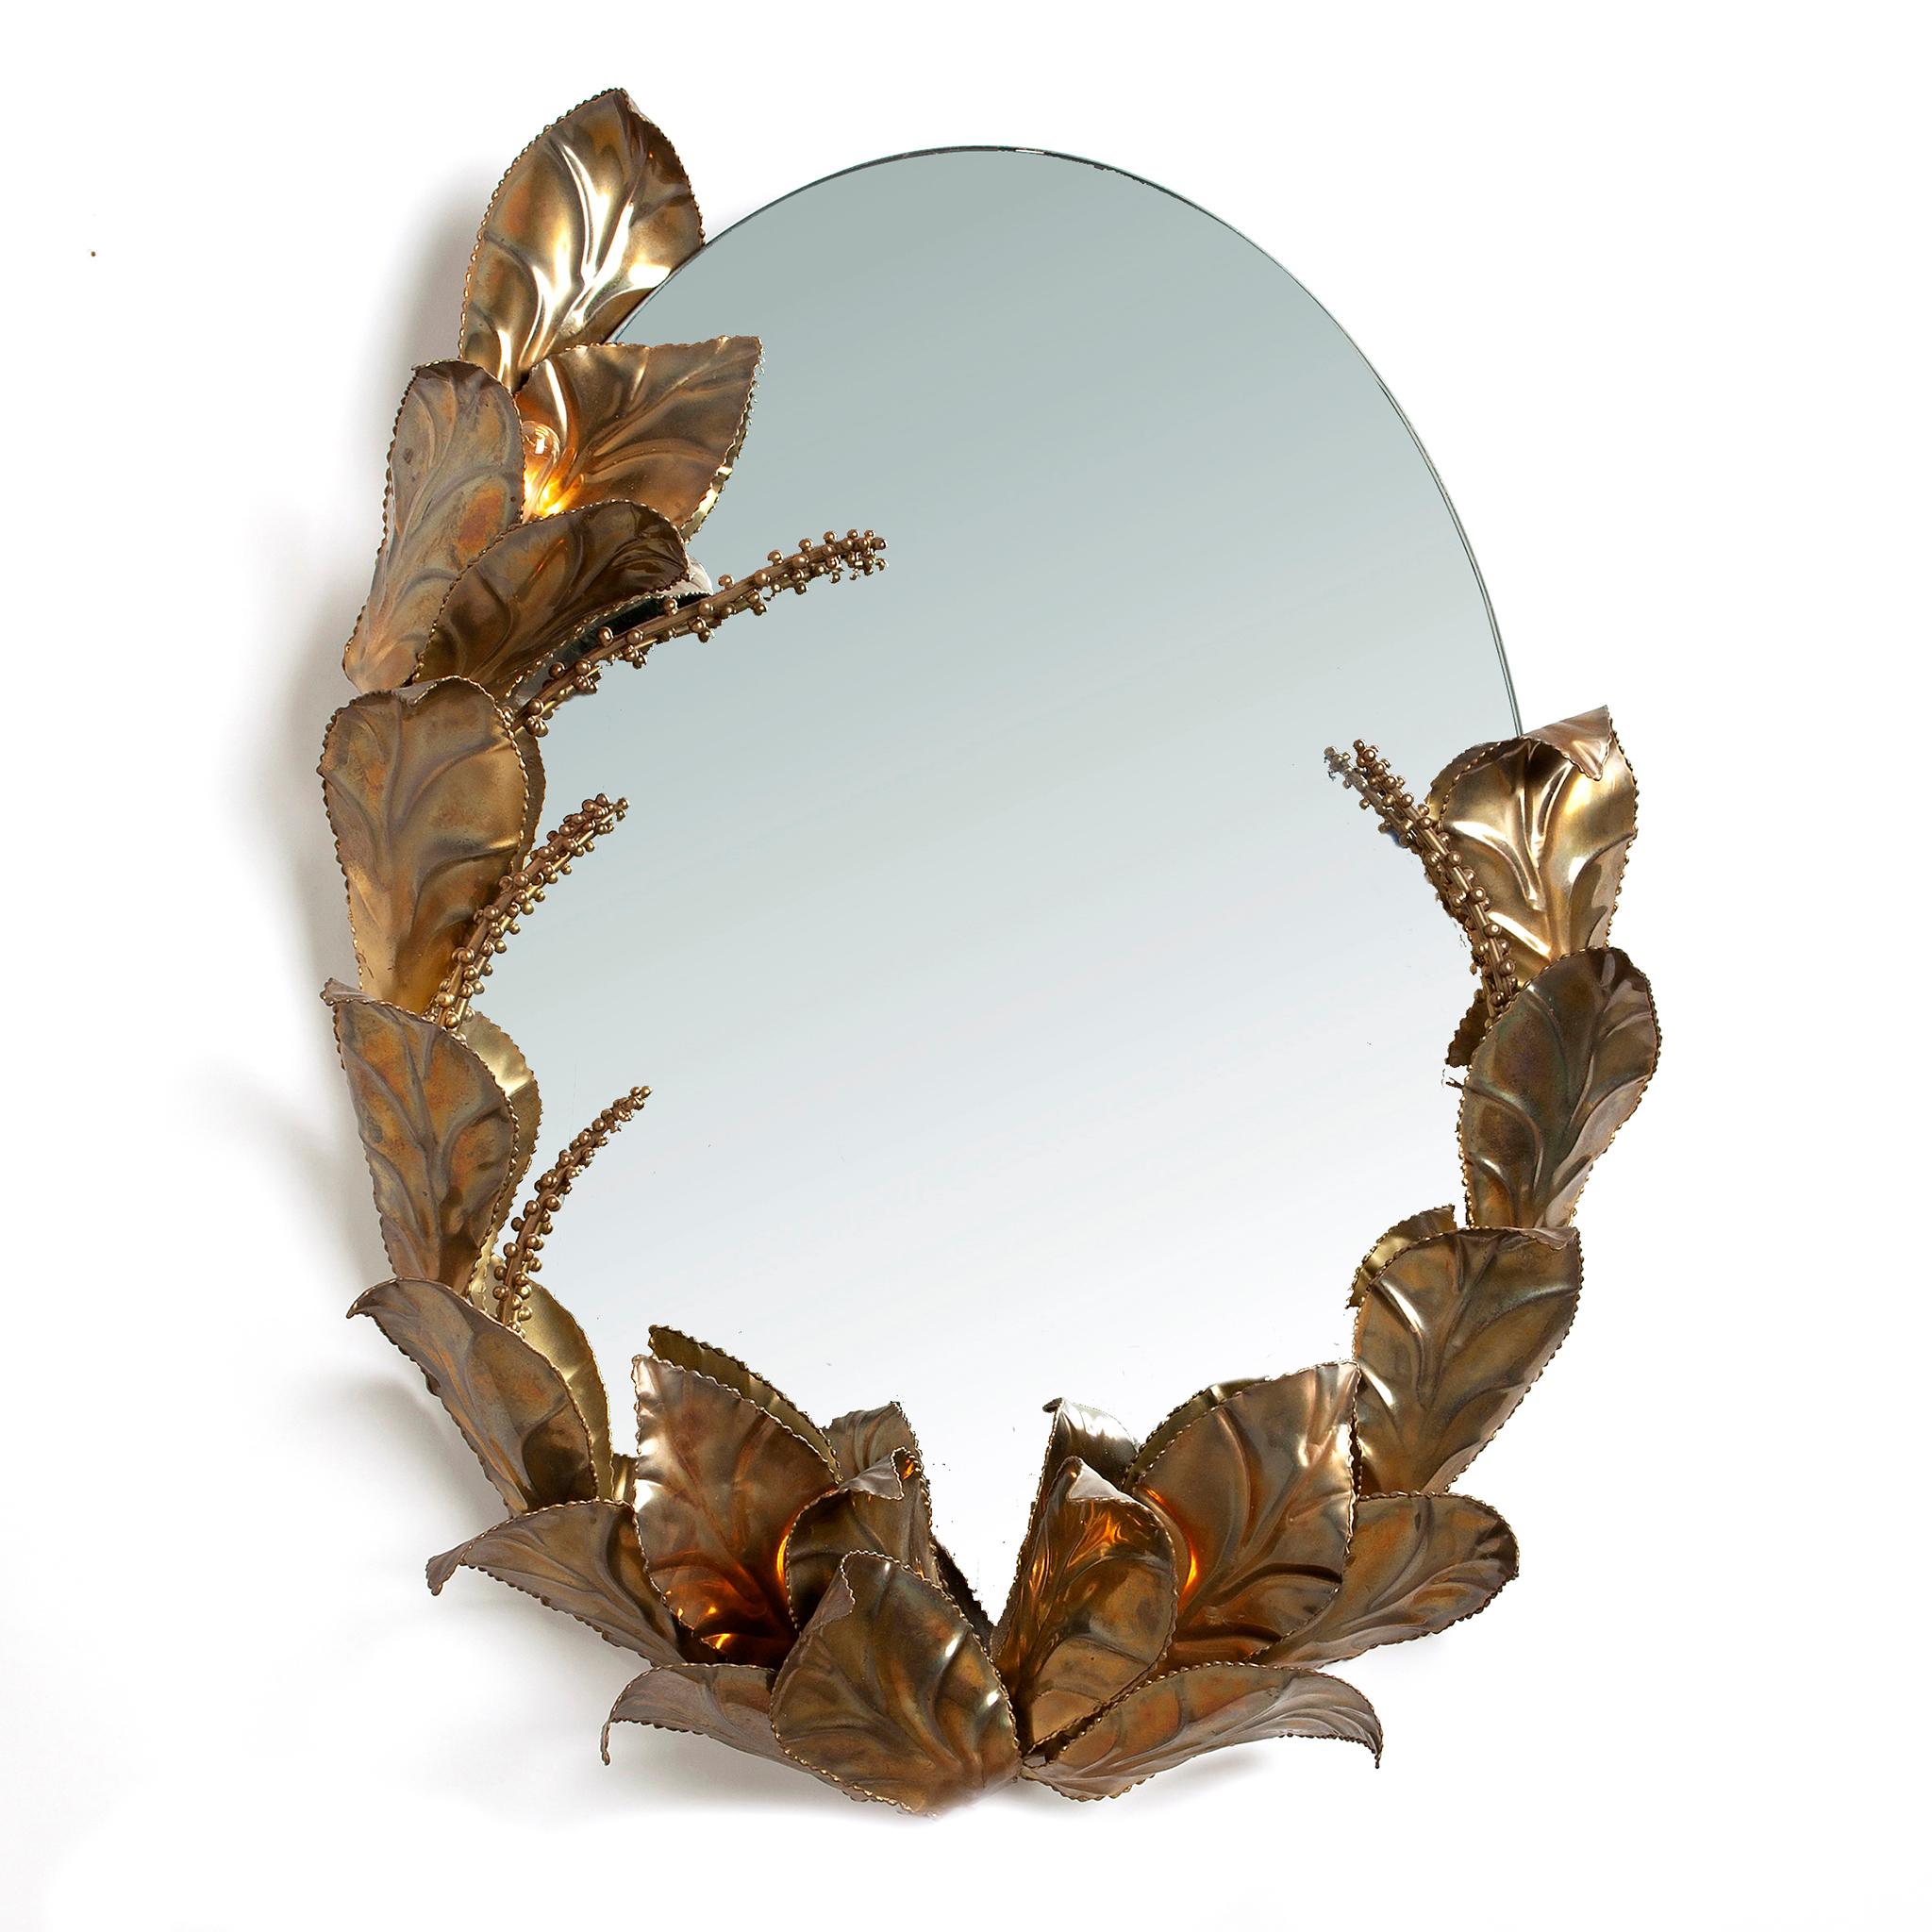 Iconic palm brass mirror and two matching wall features designed by Maison Jansen. 
A glamorous piece that perfectly suits a home decor of Hollywood Regency style. With its large metallic golden leaves & stems with seeds, it is not possible to walk